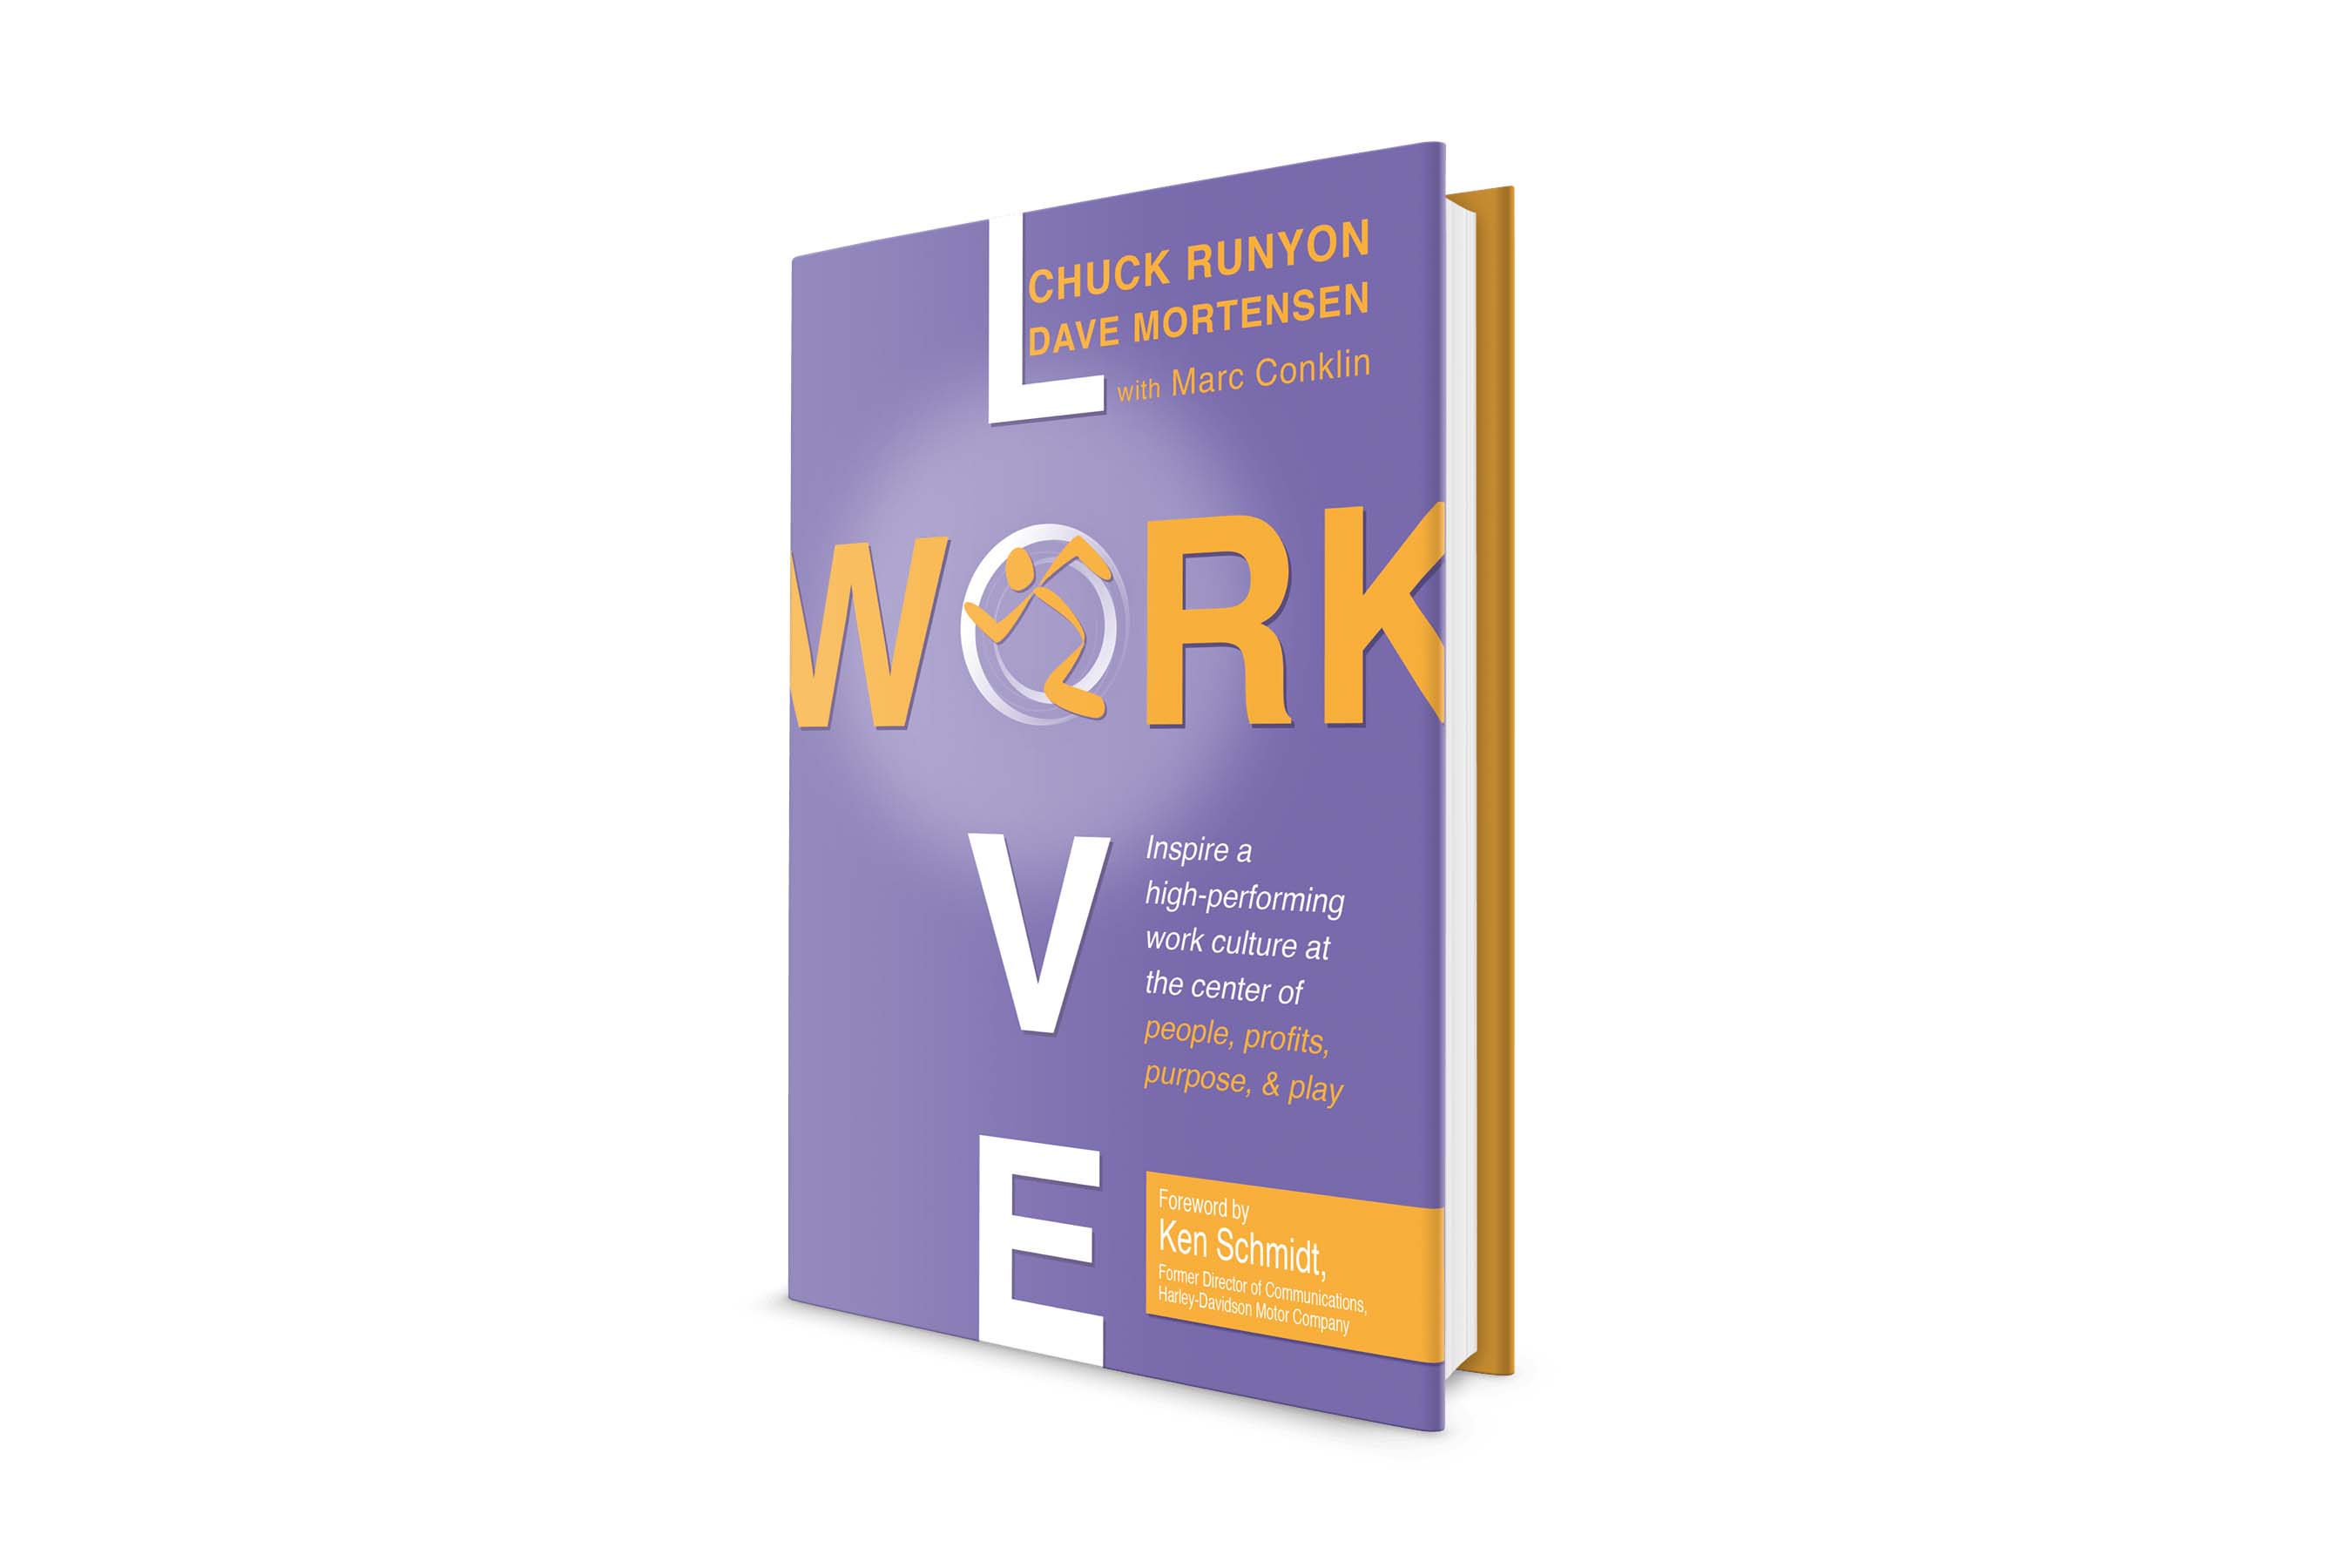 Love Work serves as a how-to manual for business leaders, managers and coaches seeking to create a high-performance team. For Runyon and Mortensen, “work” is meant to be a wonderful experience.